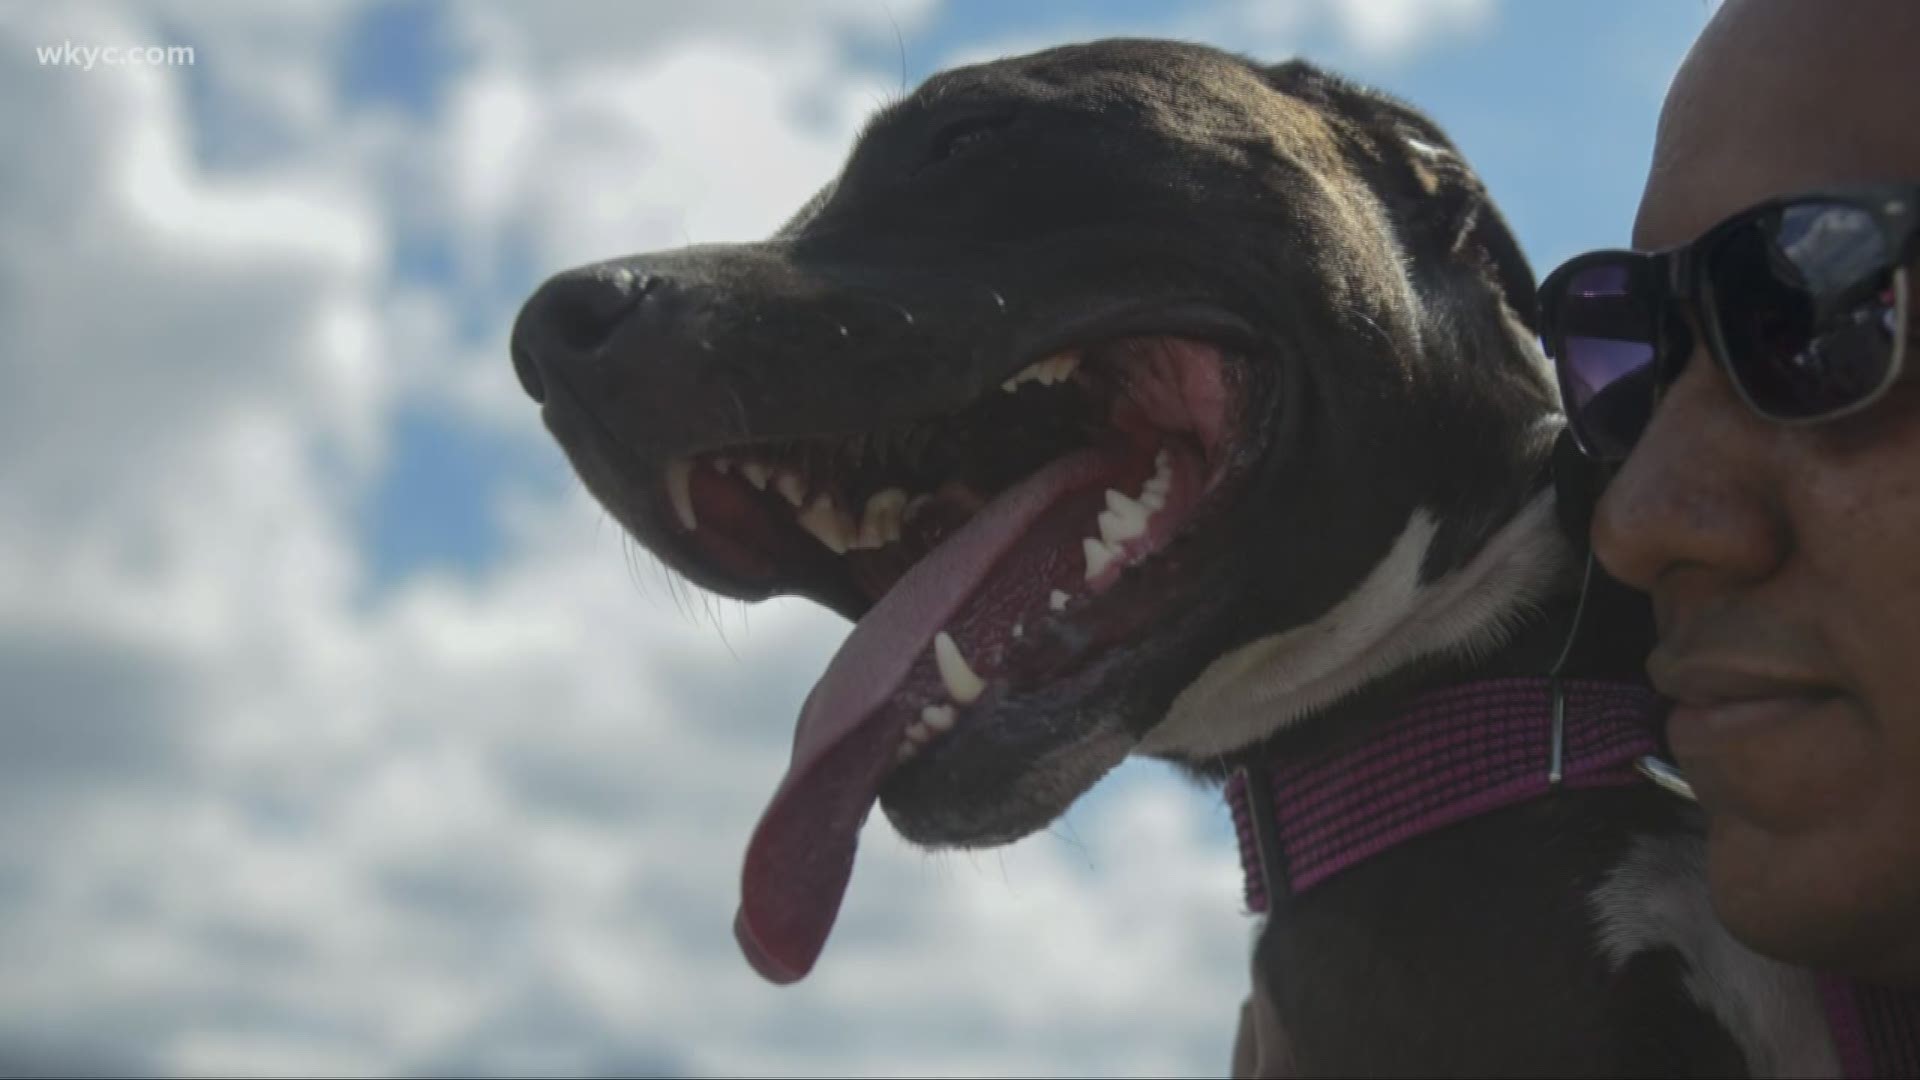 Parma pit bull ban was officially upheld by narrow margin following recount. Voters decided against repealing the city's breed-specific legislation by just 14 votes.